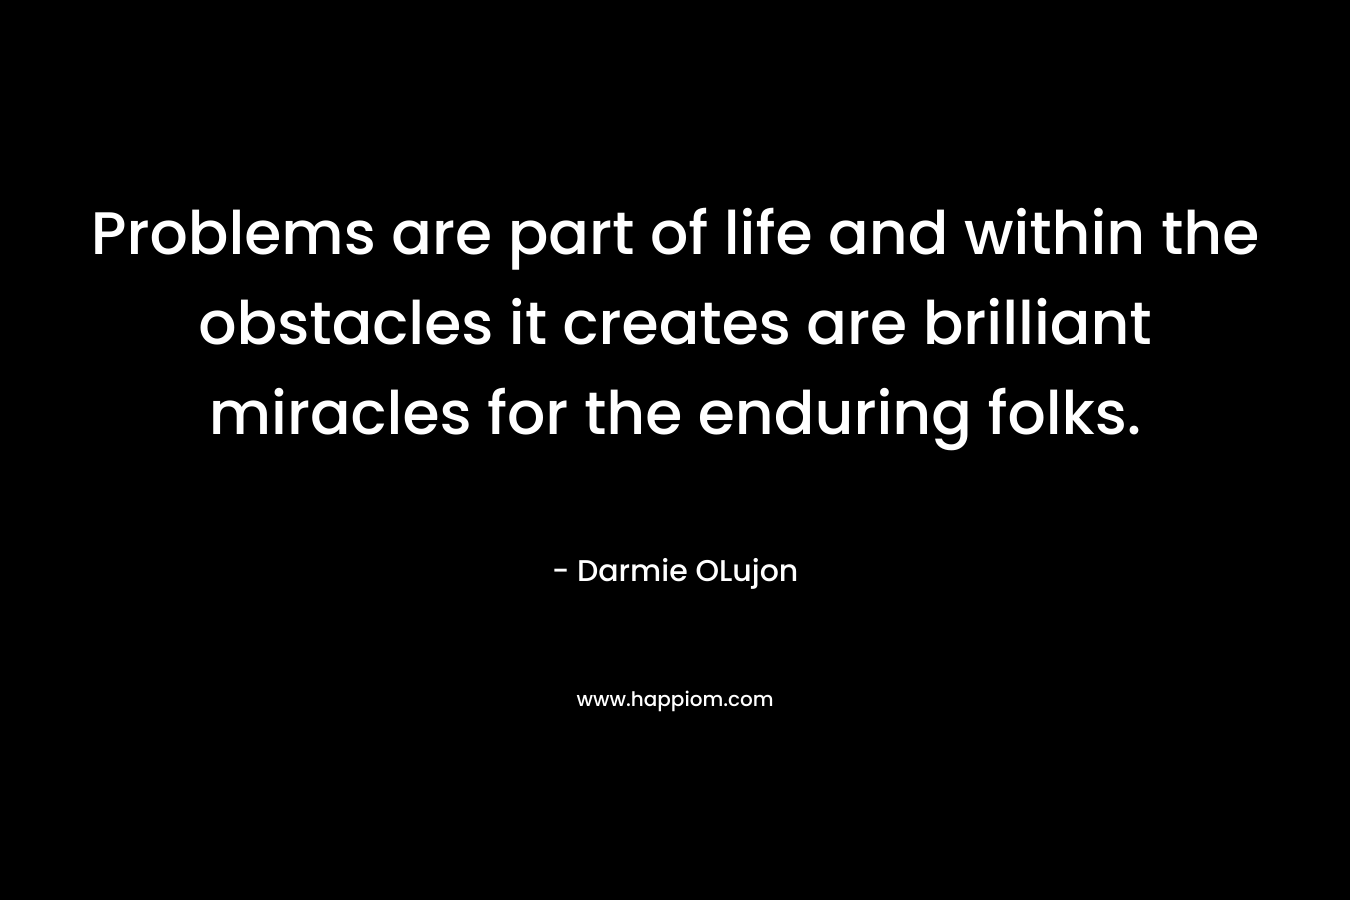 Problems are part of life and within the obstacles it creates are brilliant miracles for the enduring folks. – Darmie OLujon